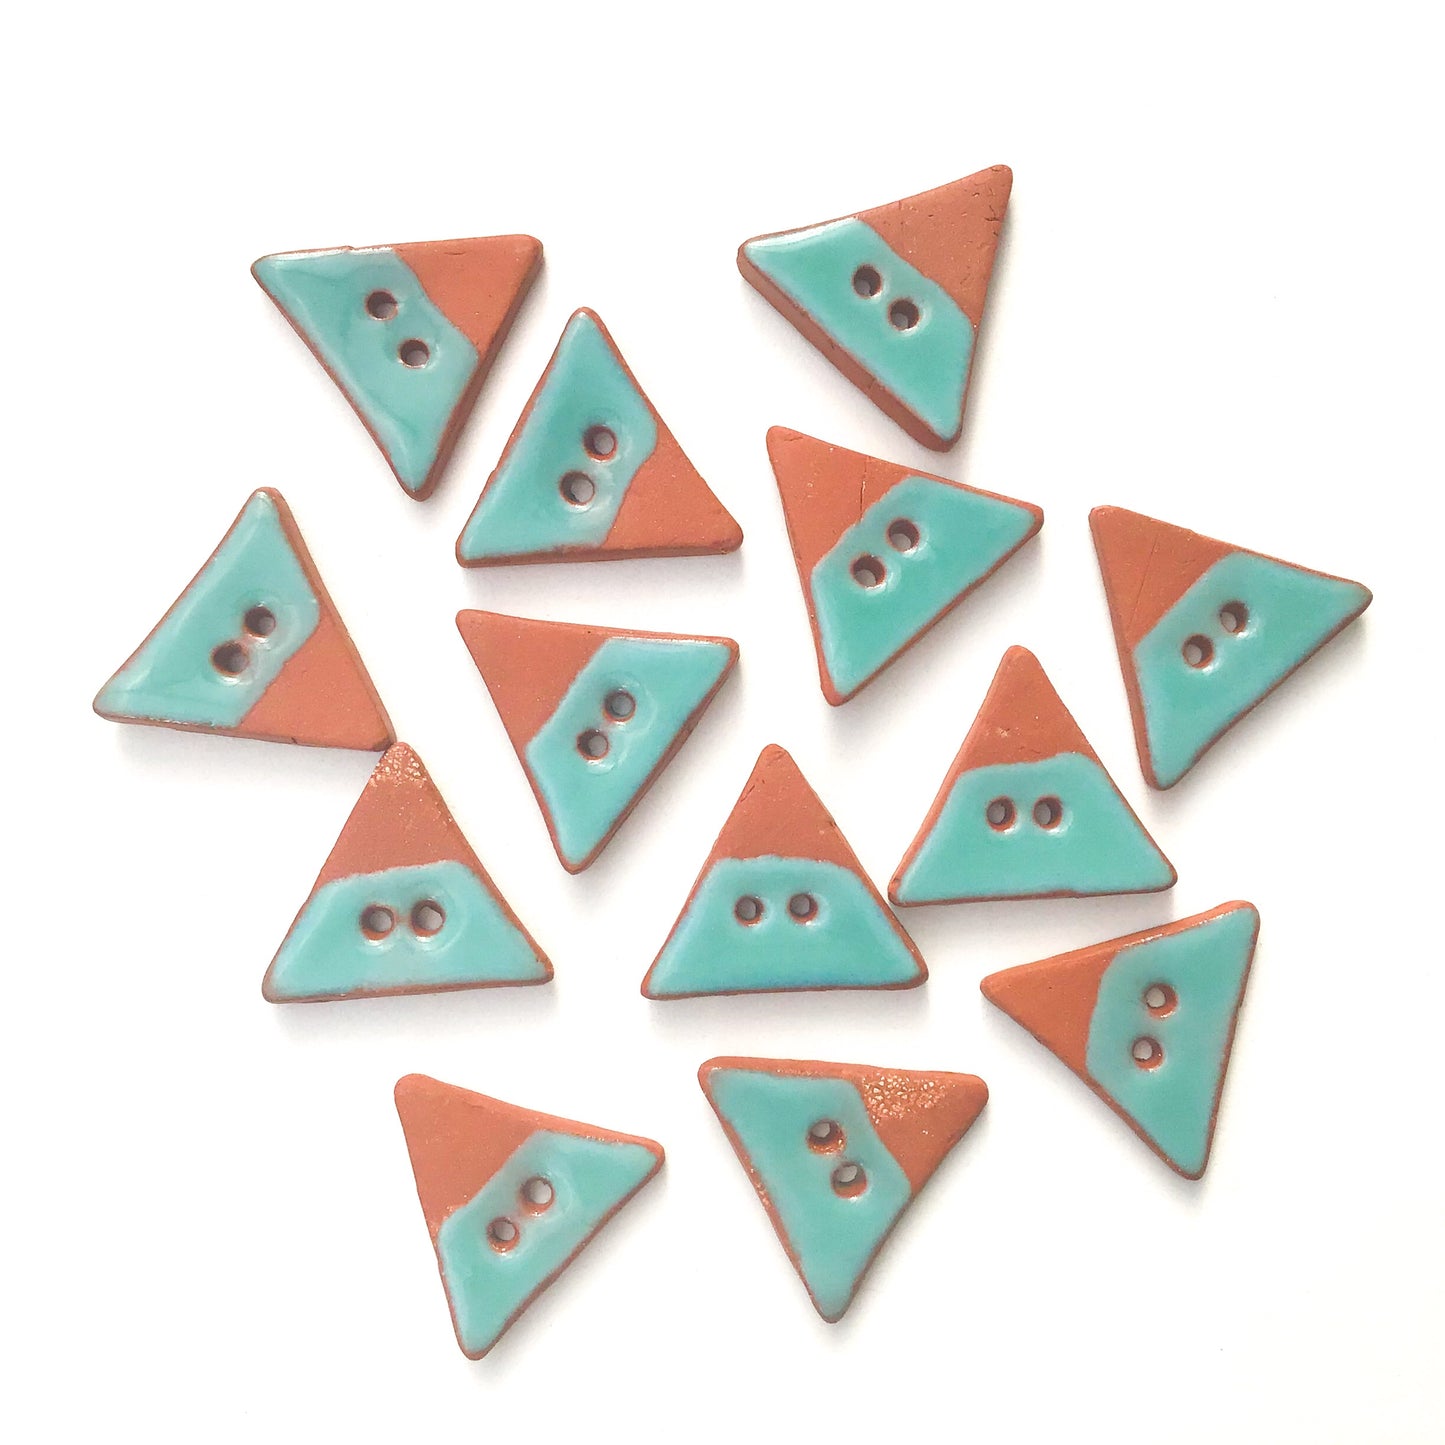 Triangular Ceramic Buttons - Turquoise on Red Clay Buttons - 7/8" x 1" (ws-245)